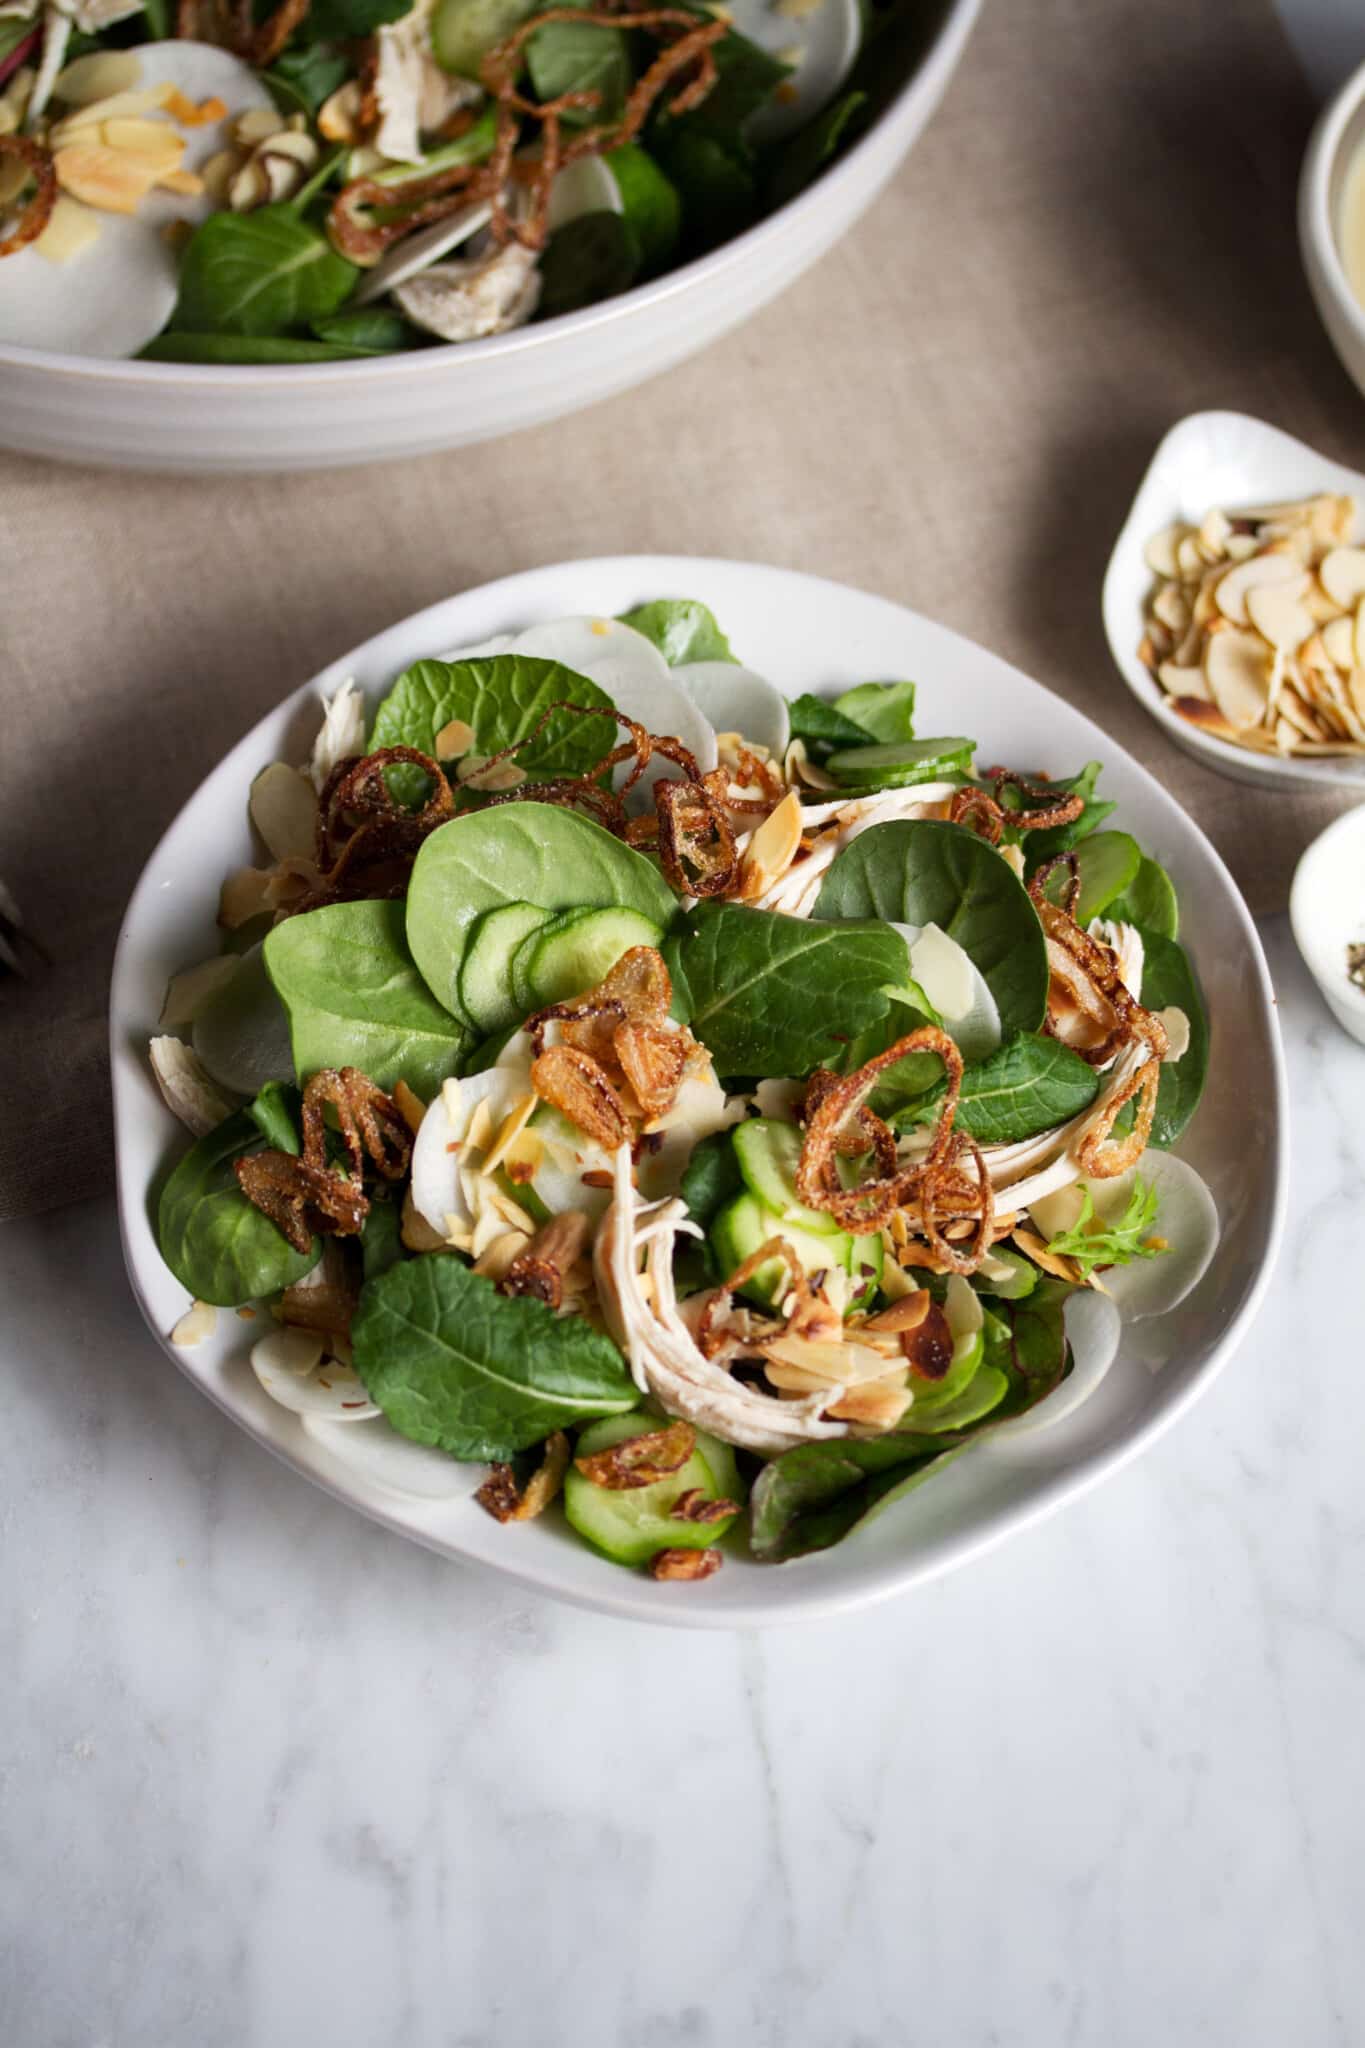 20 Healthy Recipes - Asian Chicken Salad with Mustard-Miso Dressing Recipe @saltandwind